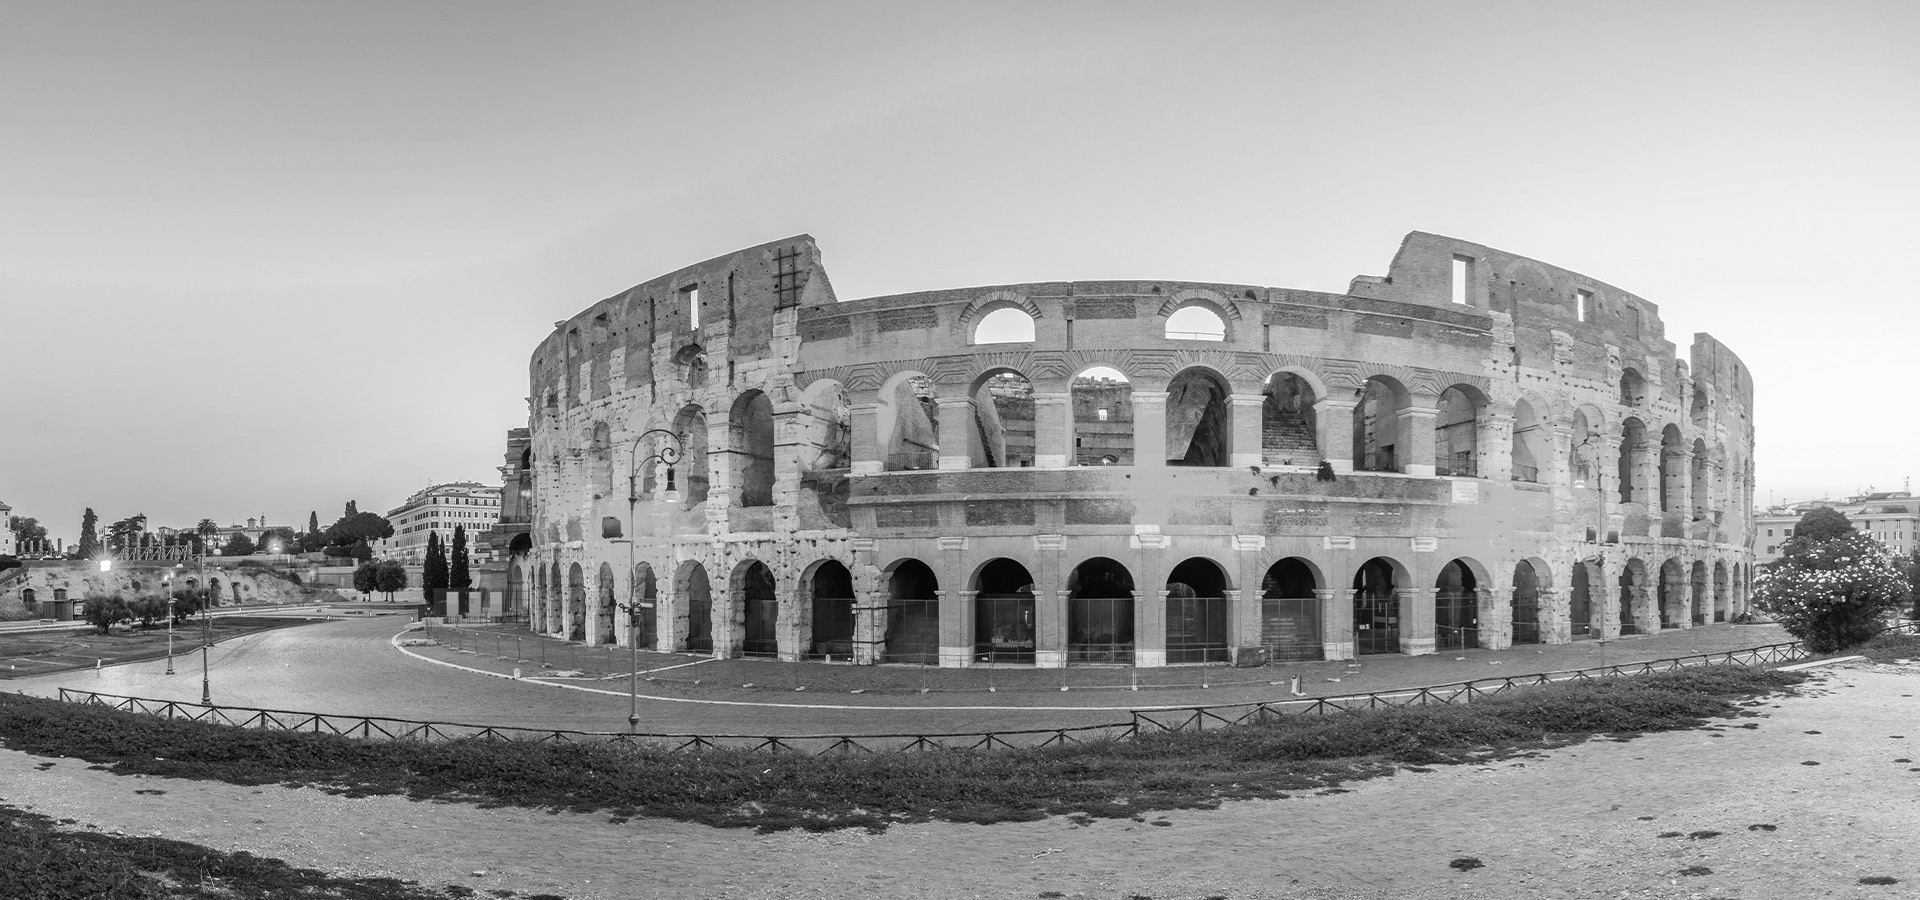 Training courses in Rome, Italy